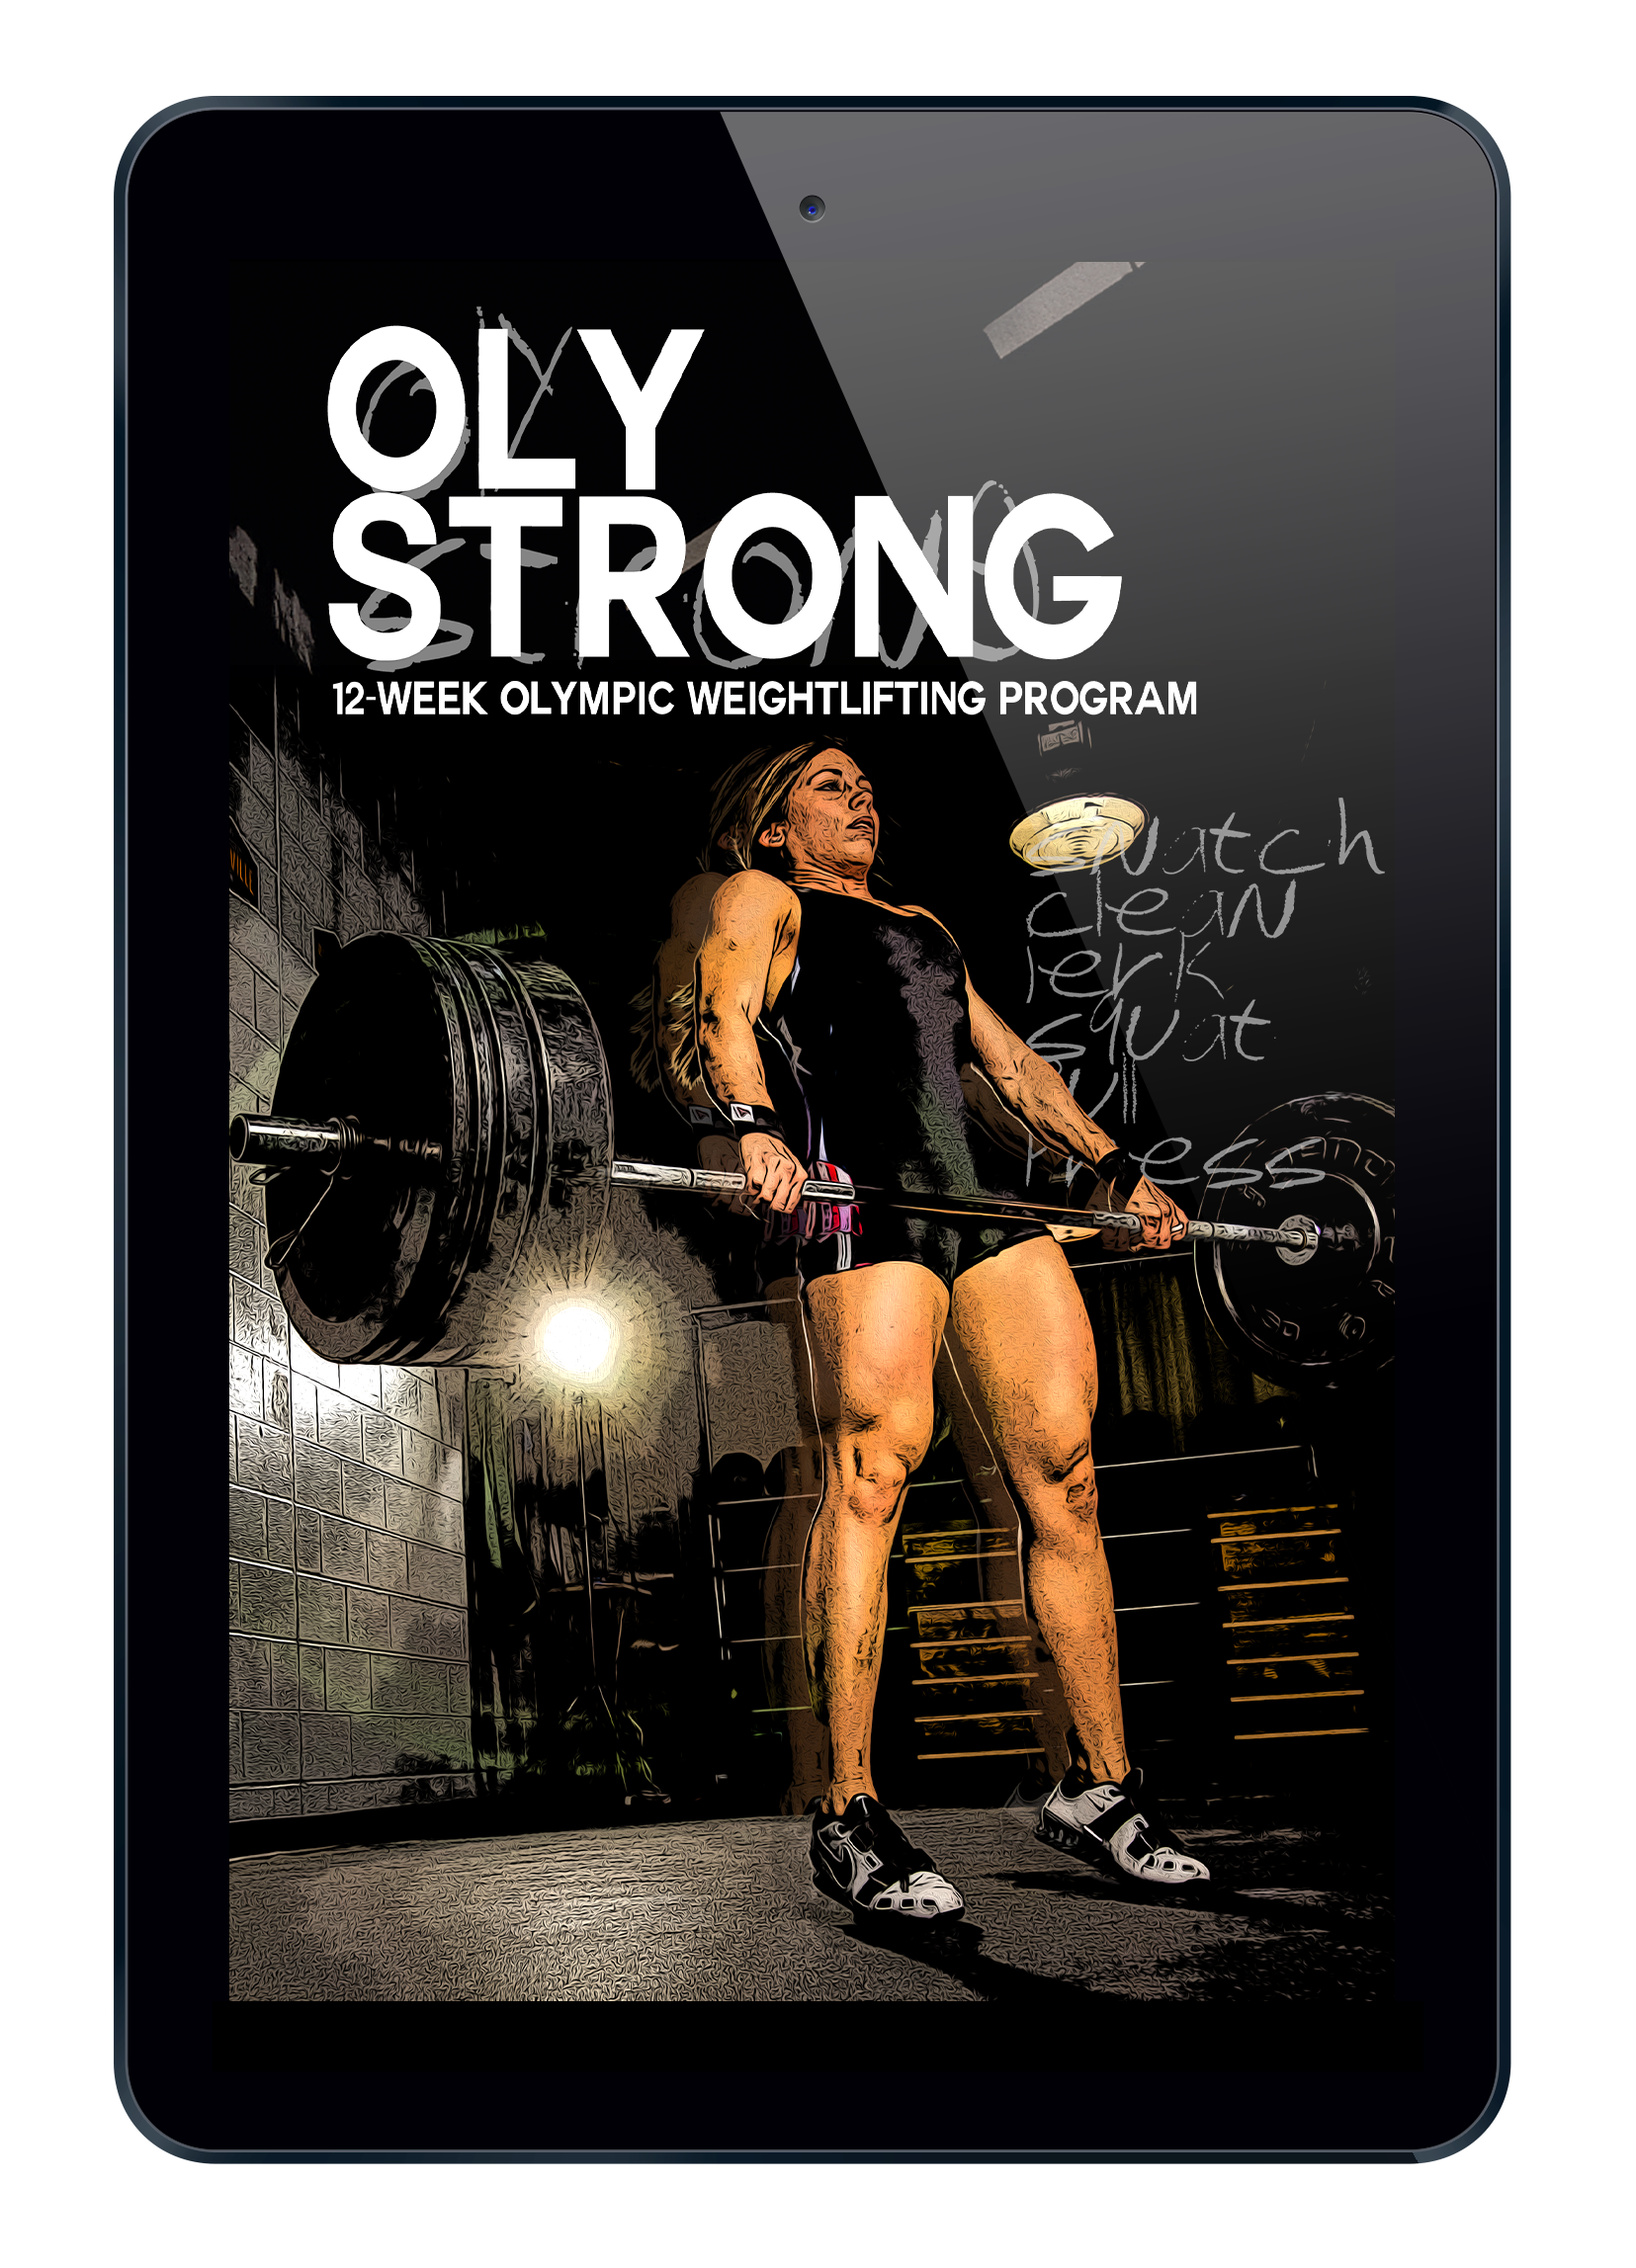 Oly Strong: 12-Week Olympic Weightlifting Program